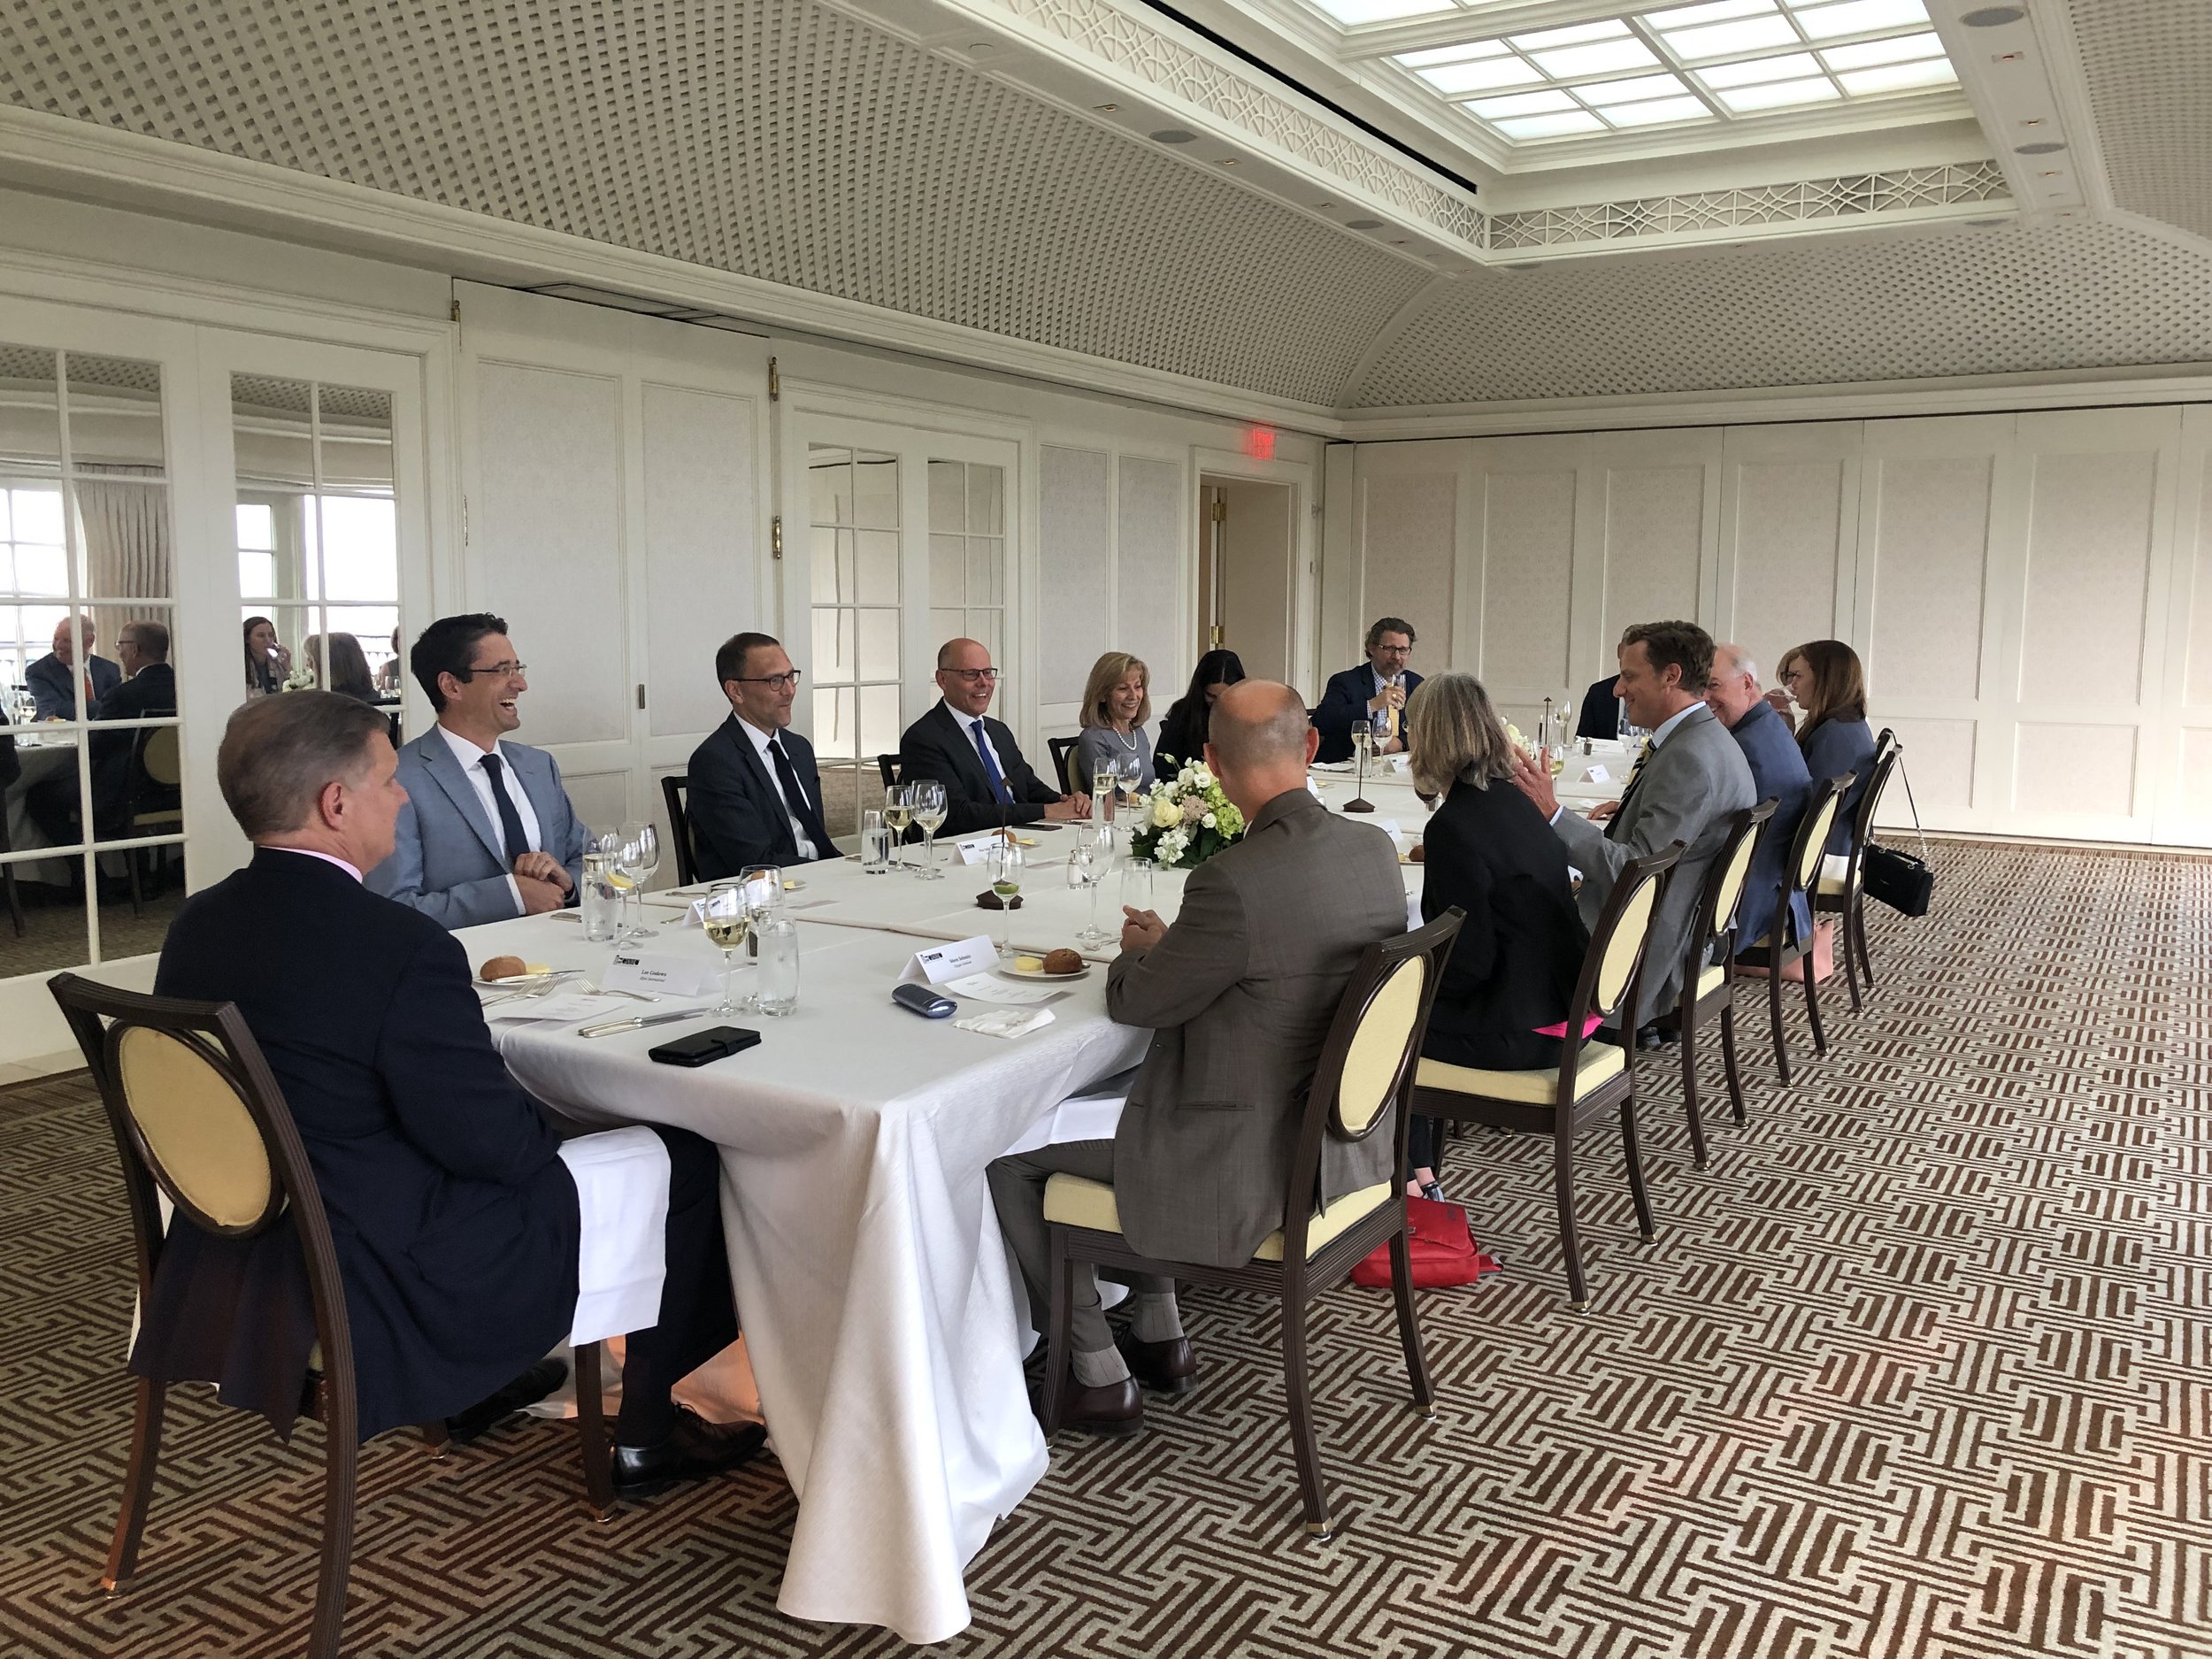  Dinner Roundtable Discussion with Peter Beyer, MP, German Coordinator of Transatlantic Cooperation and Member of the Foreign Affairs Committee in the German Bundestag 